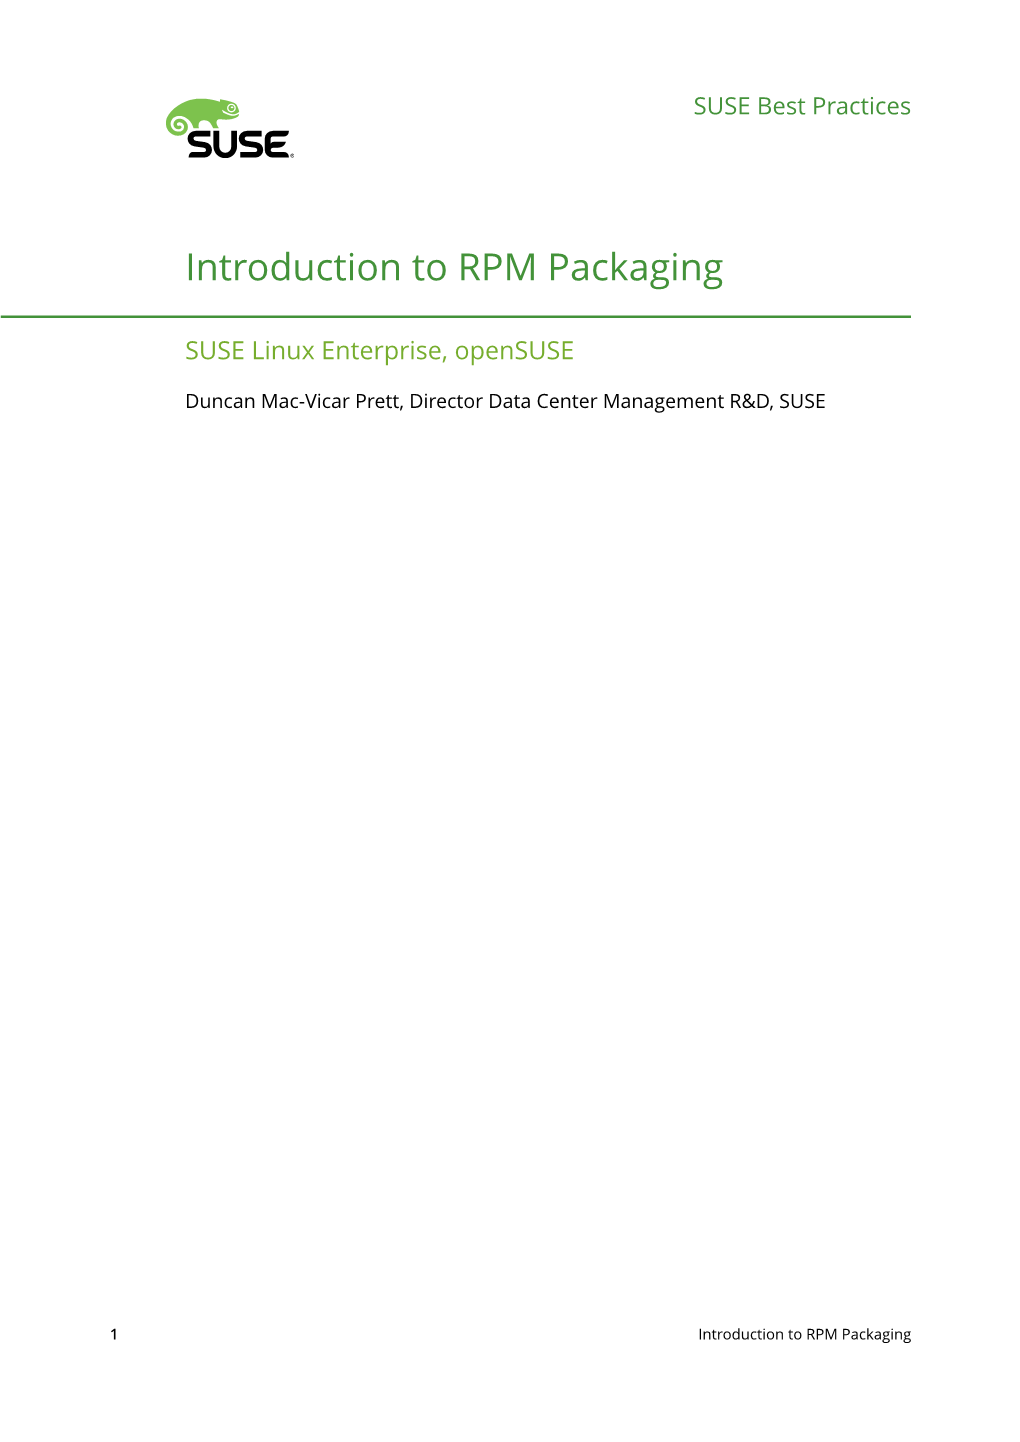 Introduction to RPM Packaging